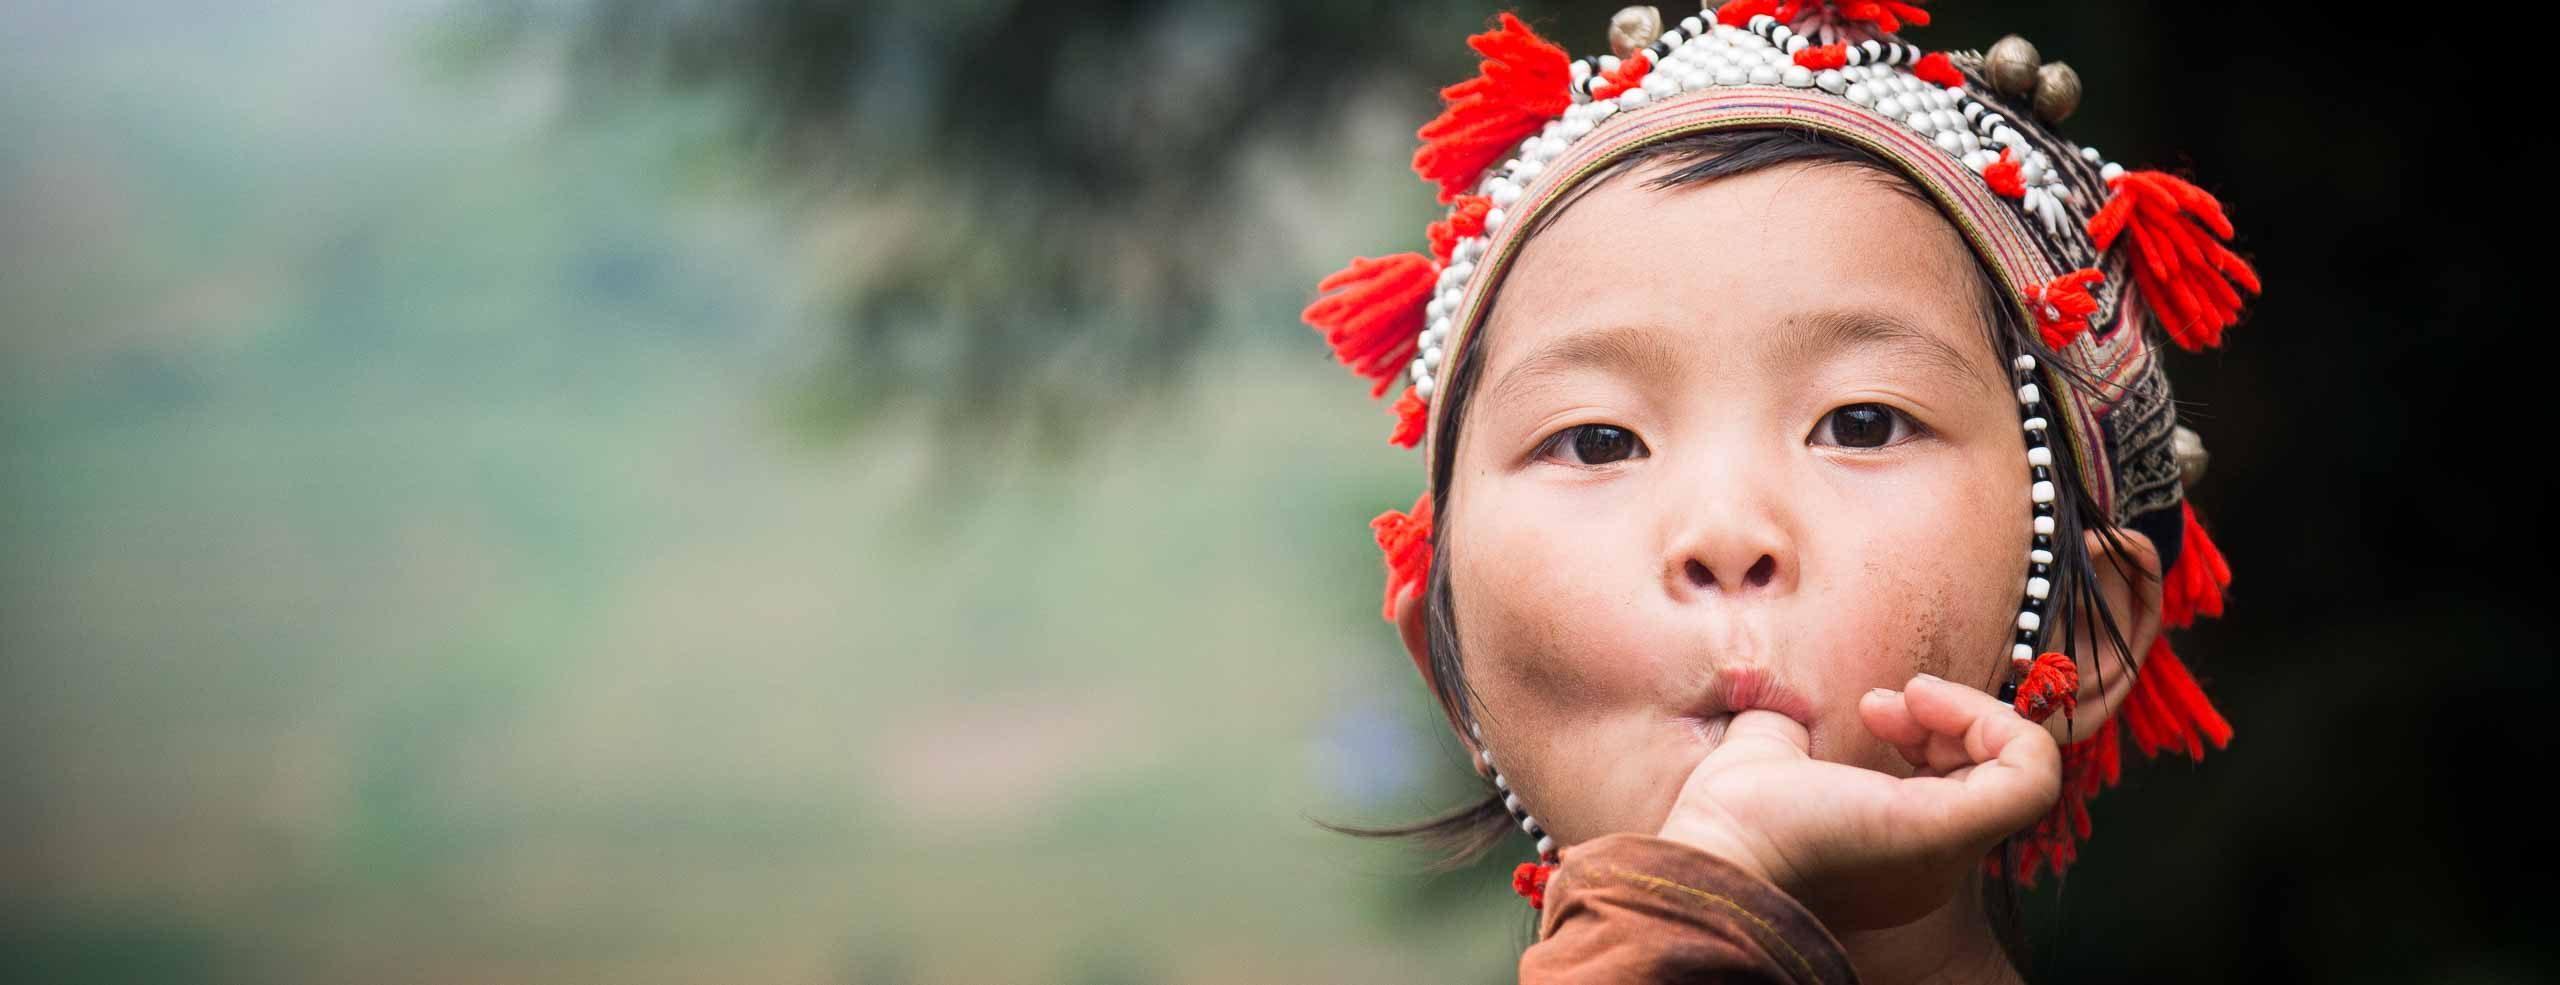 Portrait of a young Red Dzao wearing traditional clothing - Ethnics from the North Vietnam, close to the Chinese border